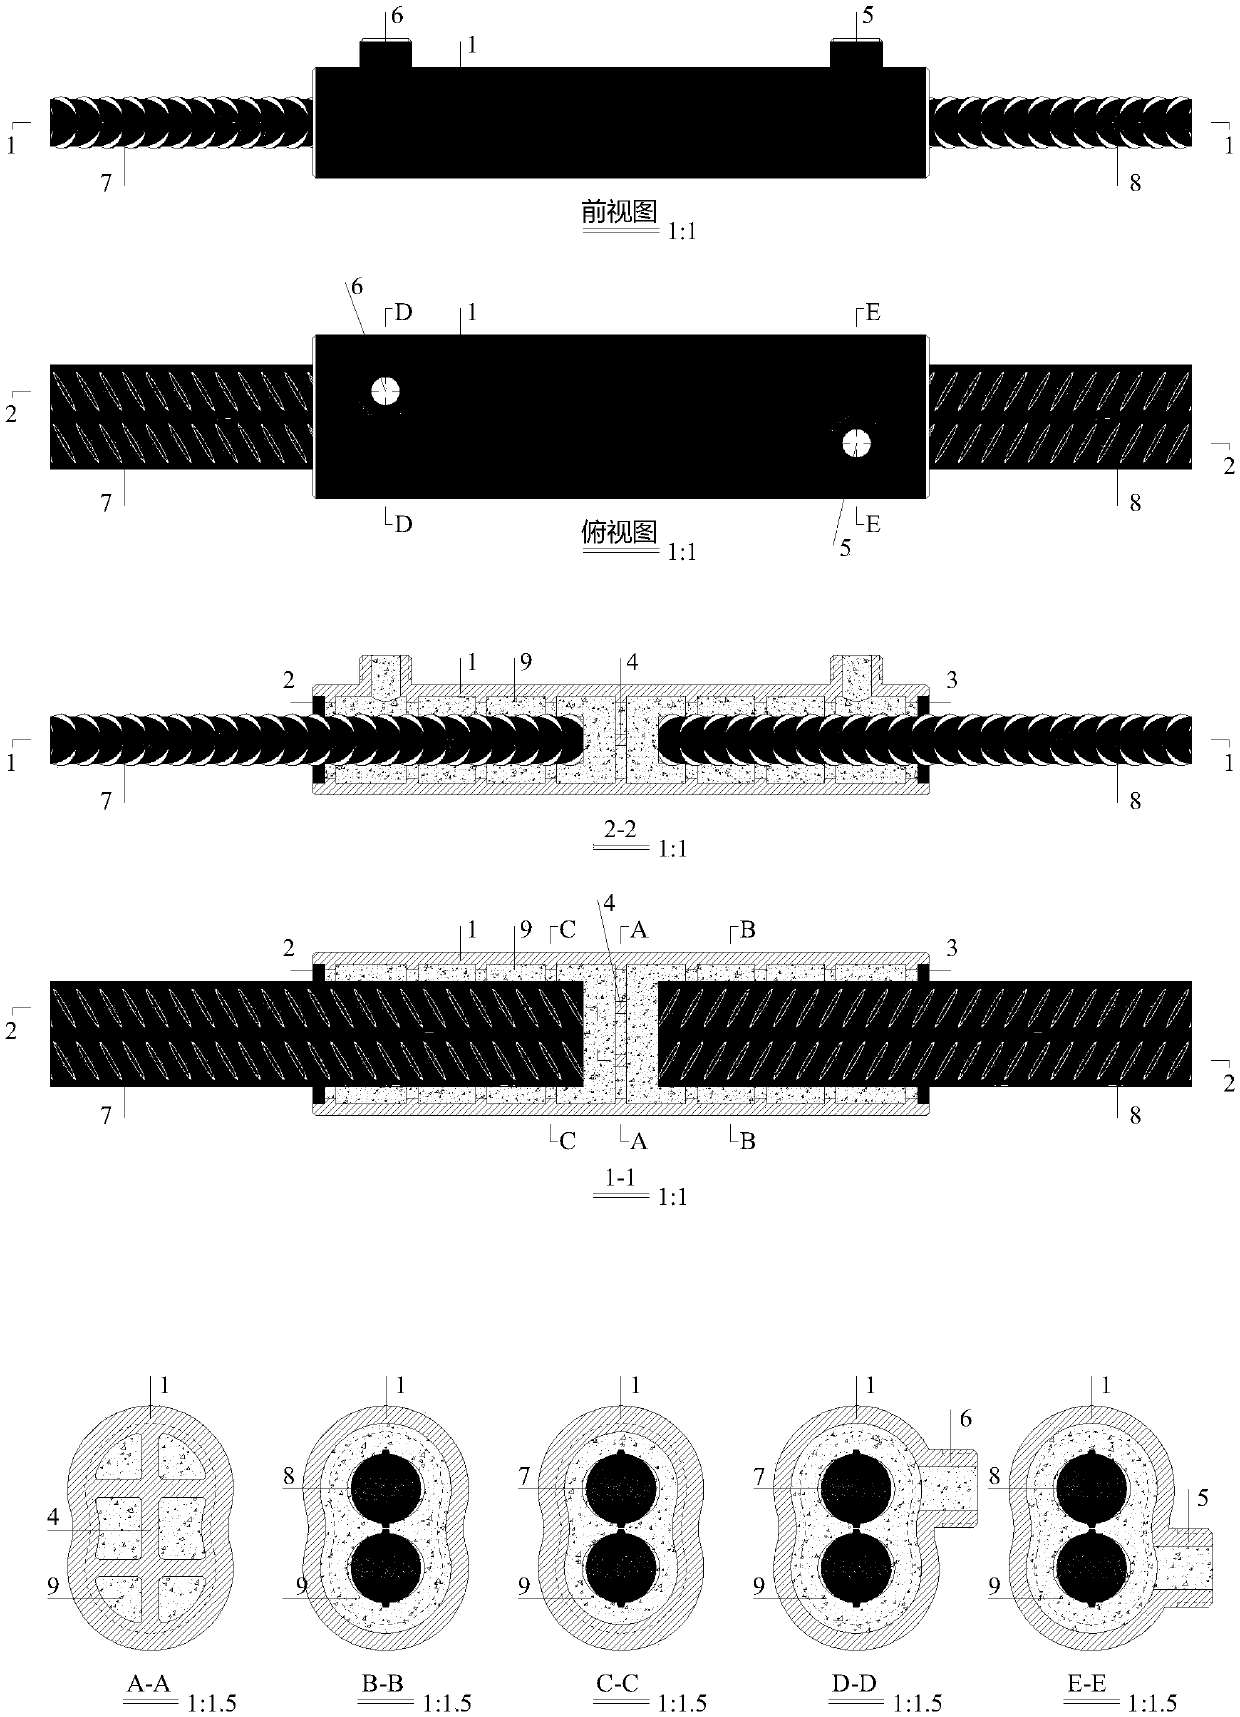 Full grouting sleeve for connecting of double bundled bars and connecting method of double bundled bars